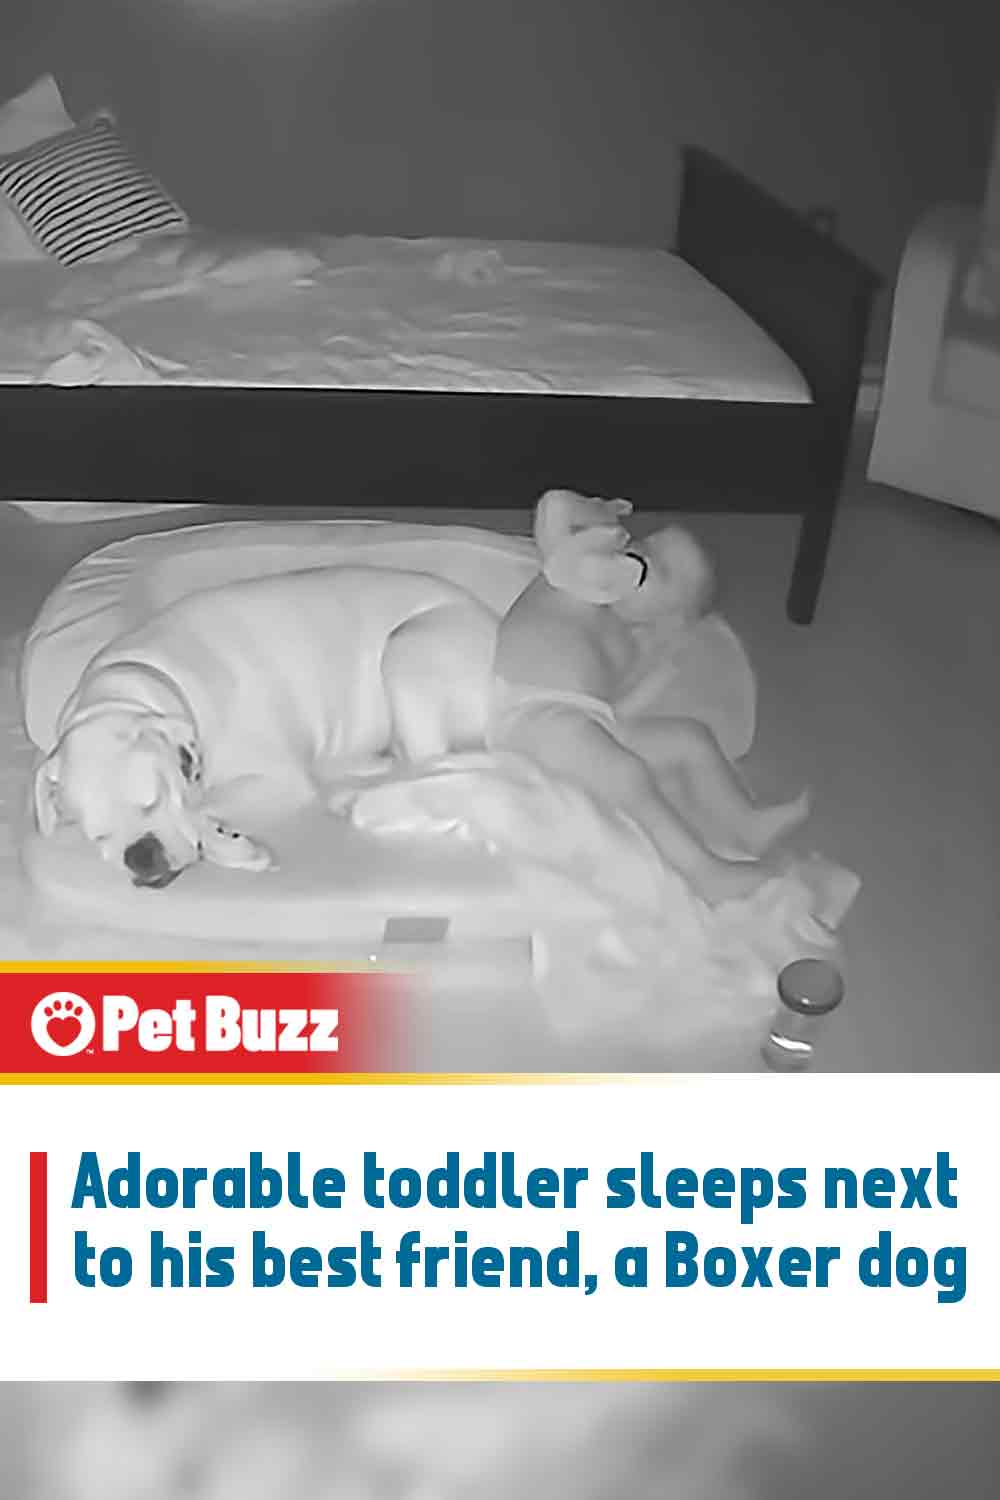 Adorable toddler sleeps next to his best friend, a Boxer dog